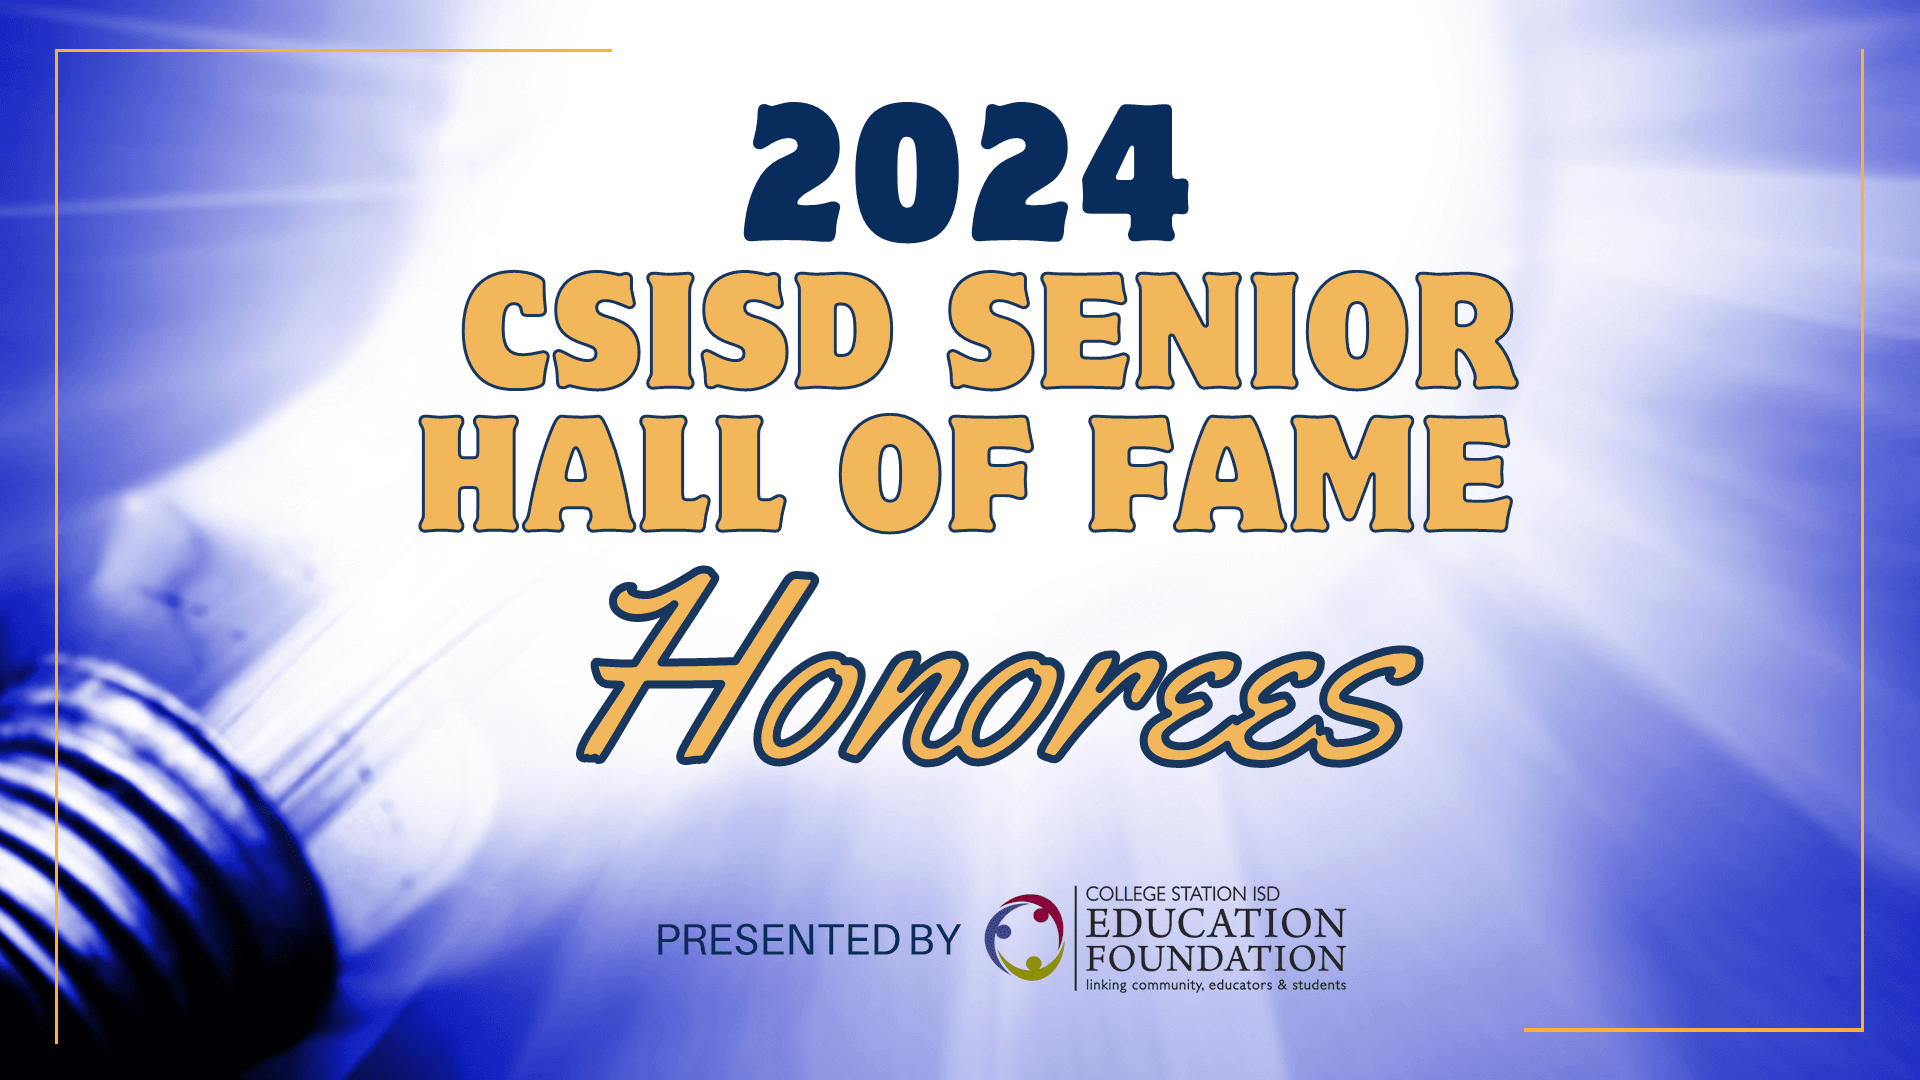 Presenting the Class of 2024 Senior Hall of Fame Honorees